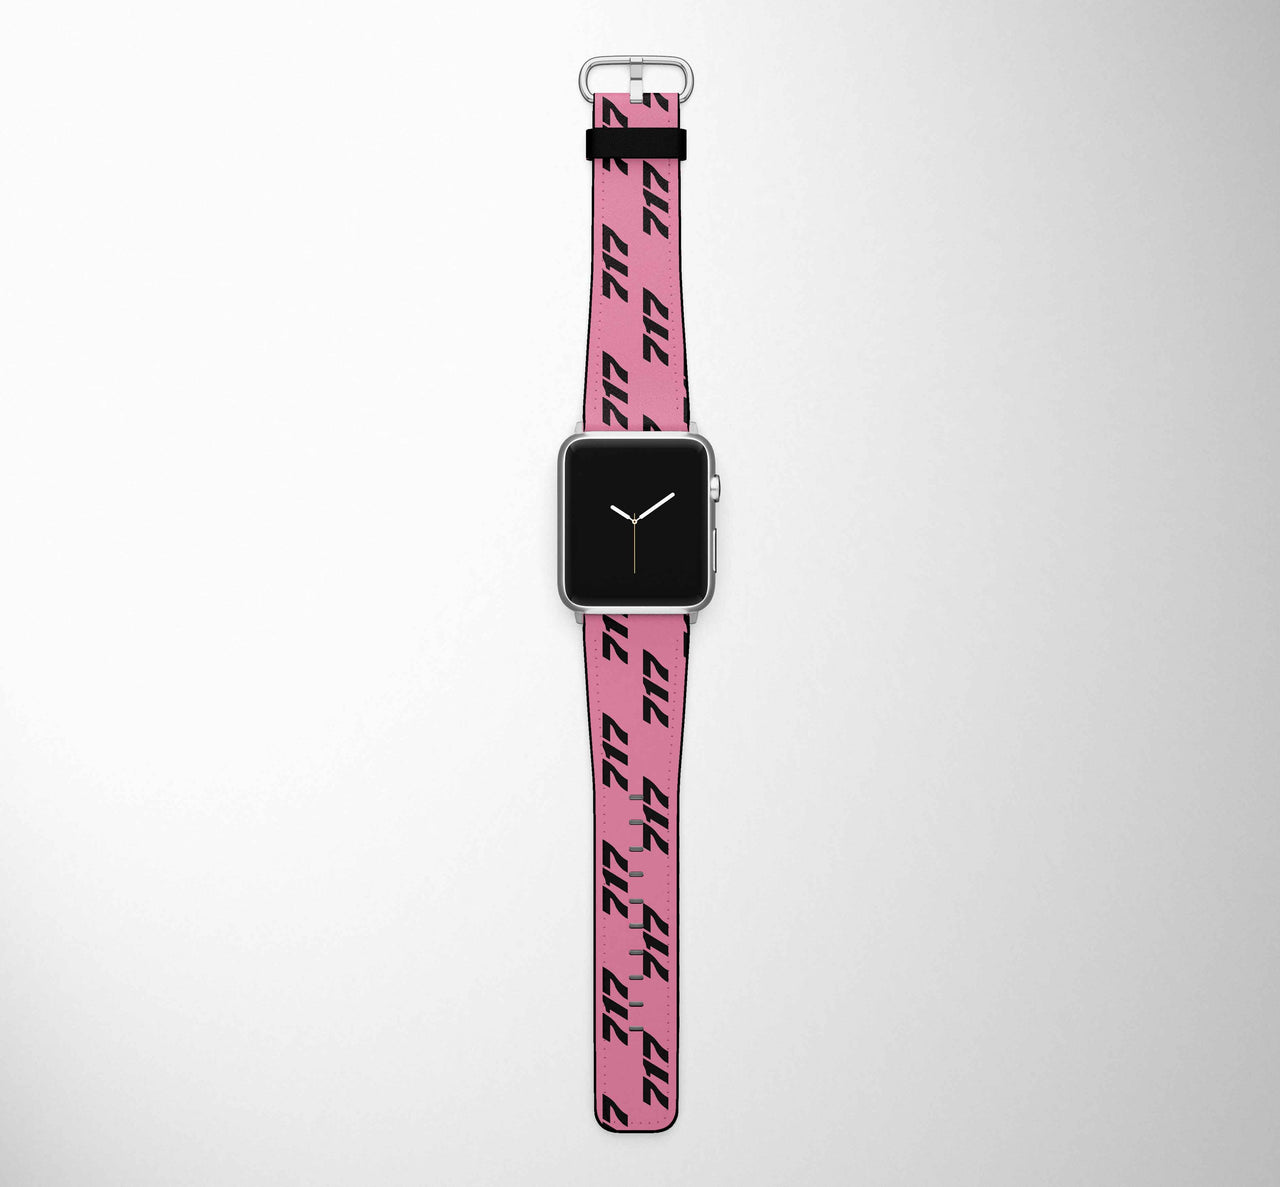 717 Flat Text Designed Leather Apple Watch Straps